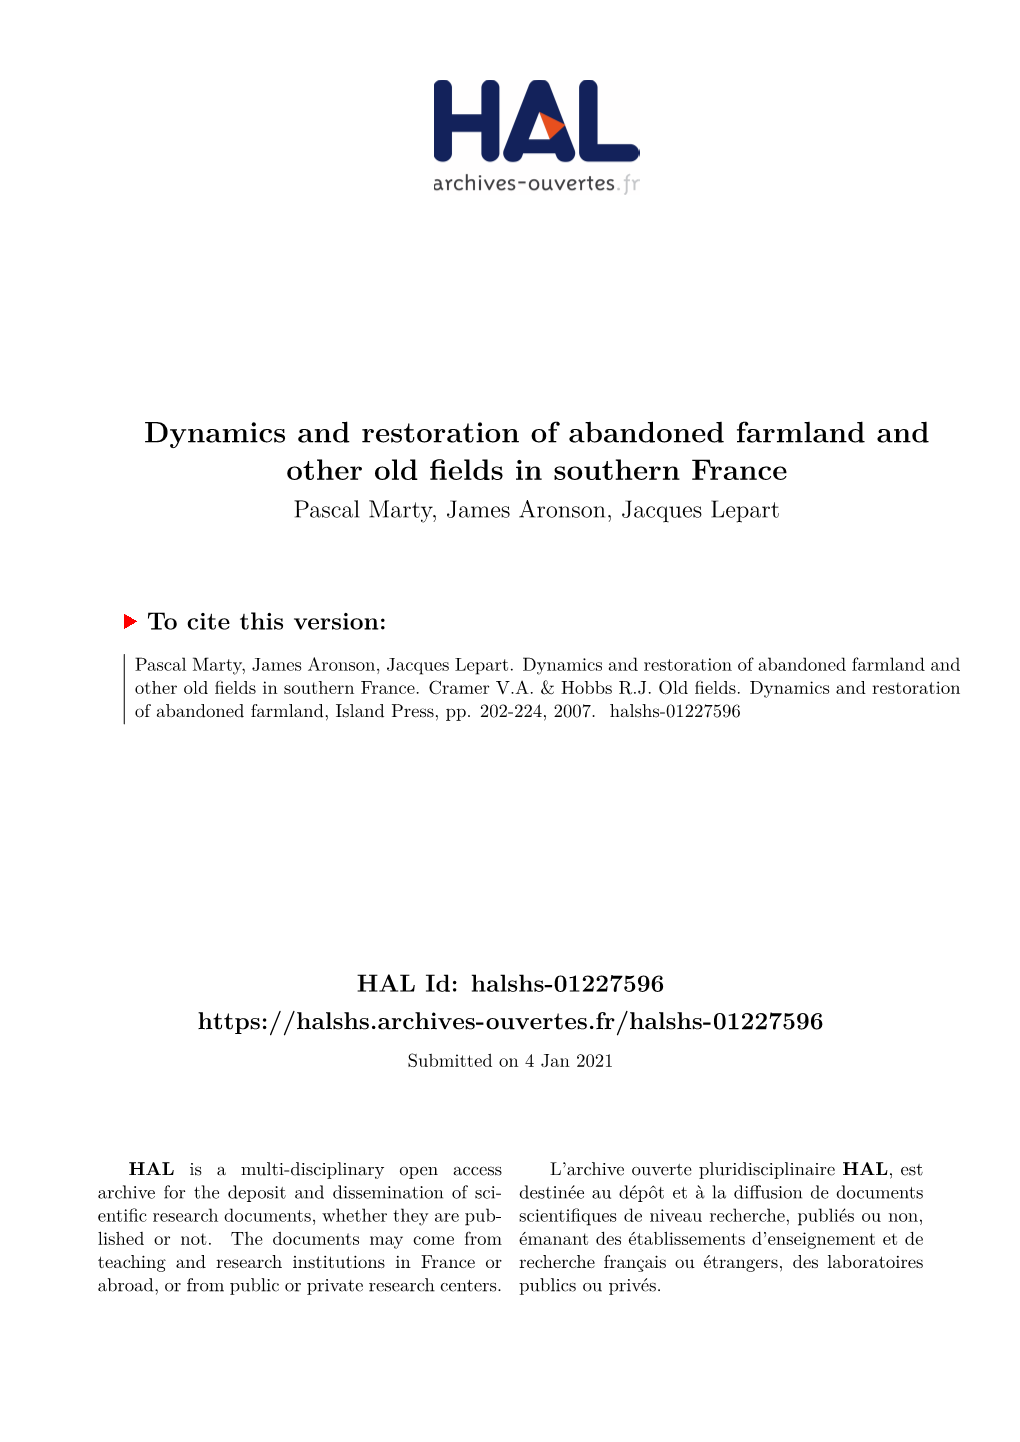 Dynamics and Restoration of Abandoned Farmland and Other Old Fields in Southern France Pascal Marty, James Aronson, Jacques Lepart